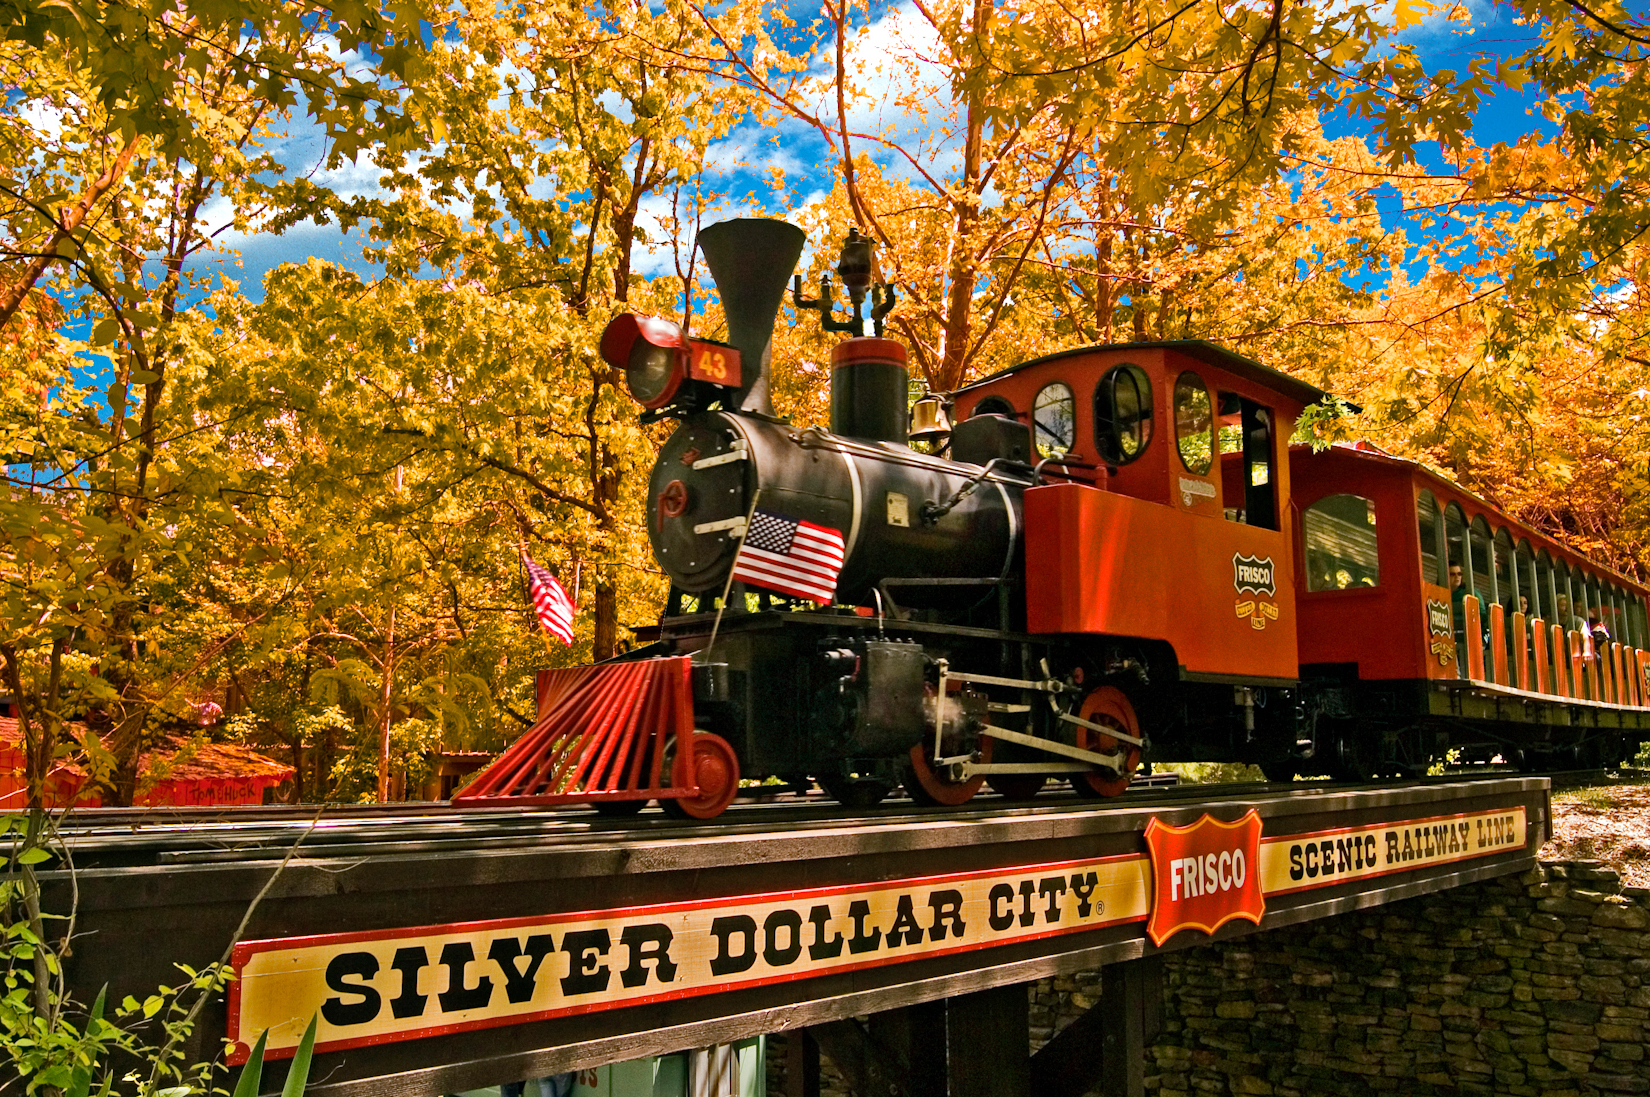 Convention-goers can ride and tour the Silver Dollar City steam railroad in Branson, Missouri.